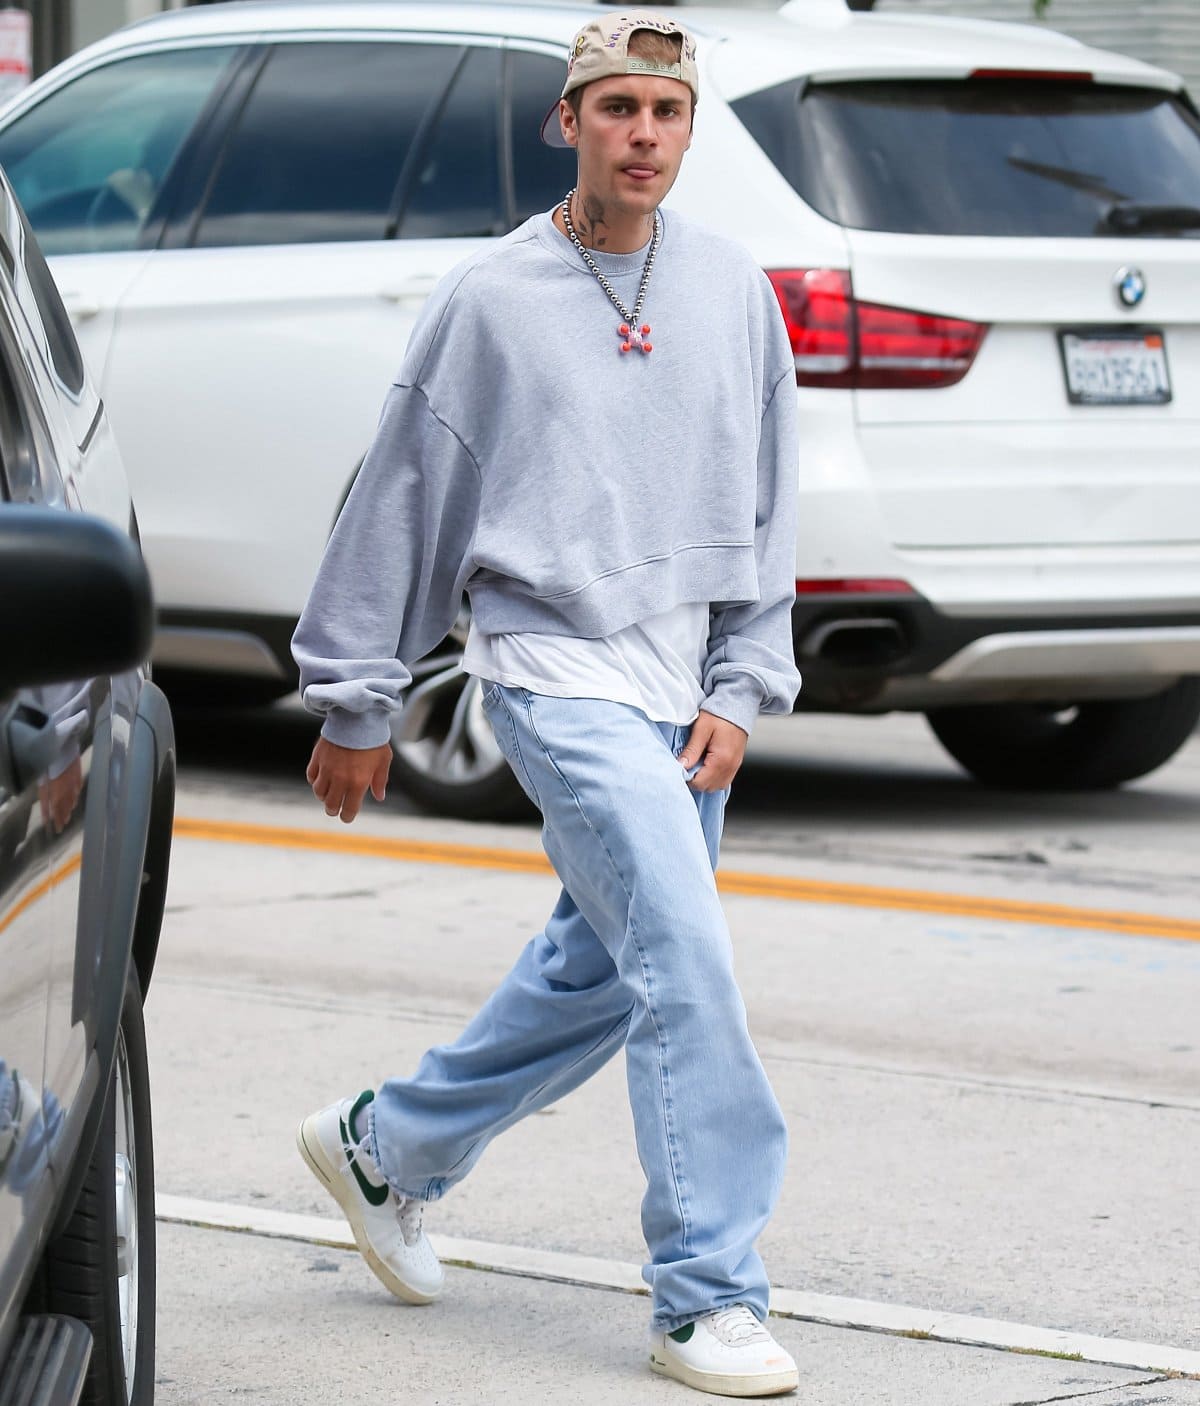 Justin Bieber stuck to his casual style in baggy clothes with sneakers and a backwards baseball cap